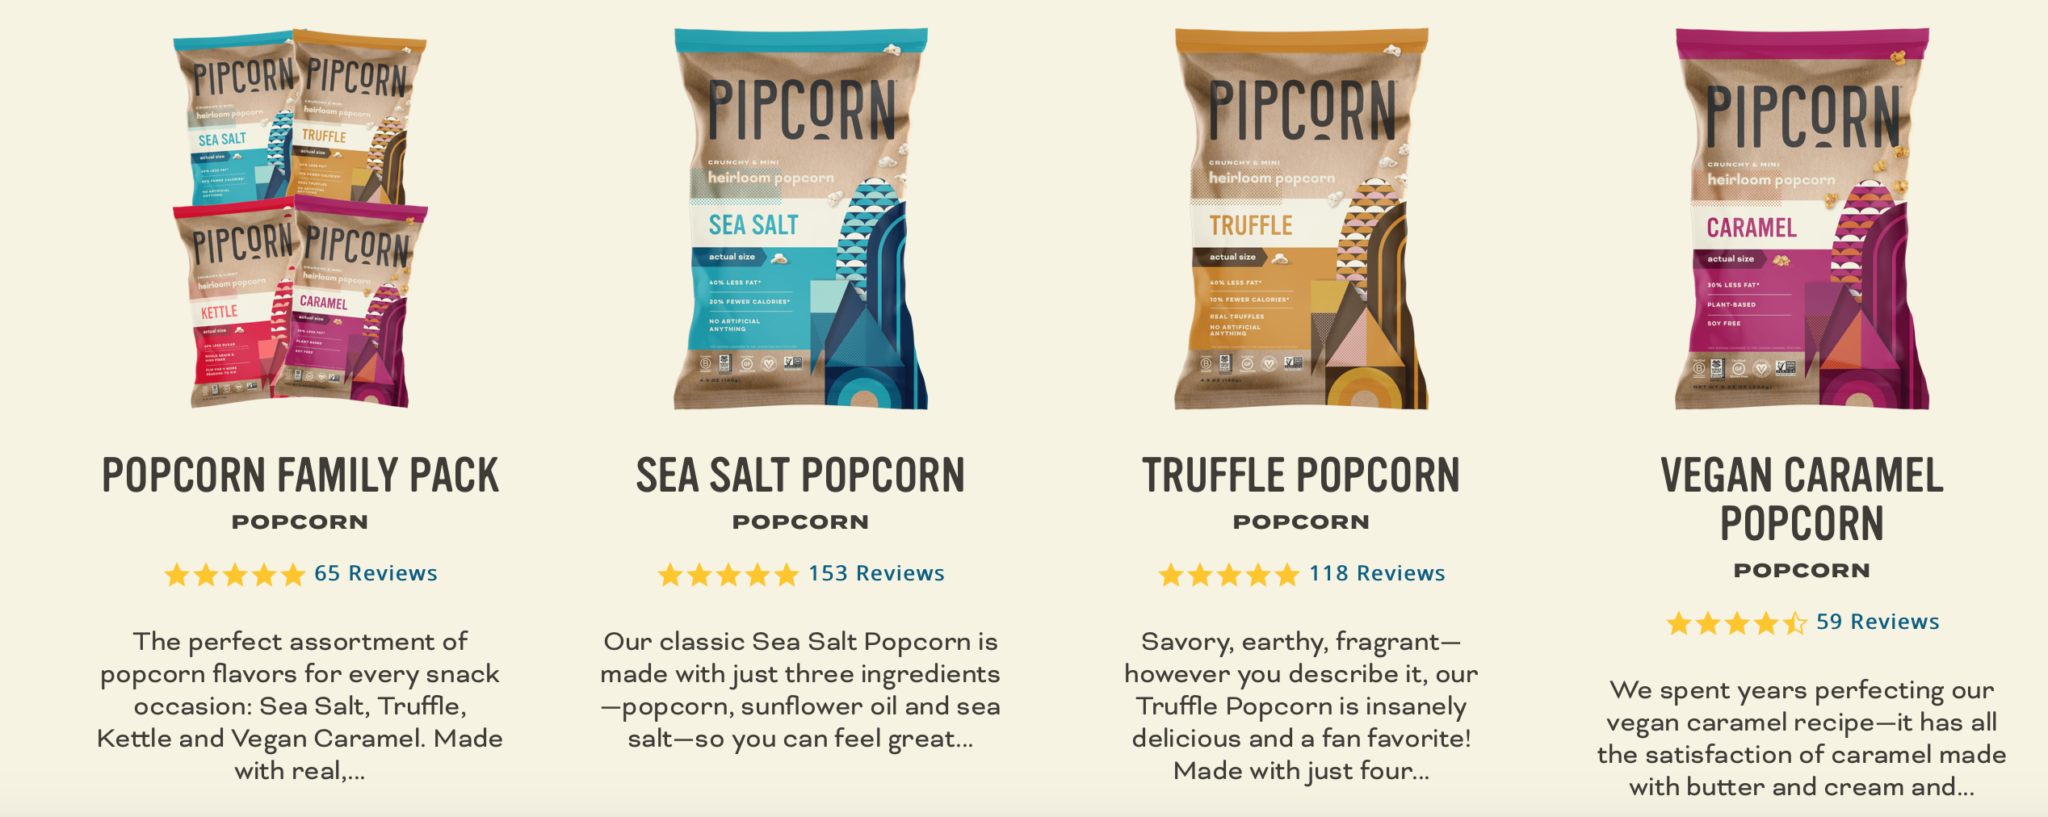 How to conduct e-commerce website testing: comparing descriptions for popcorn product